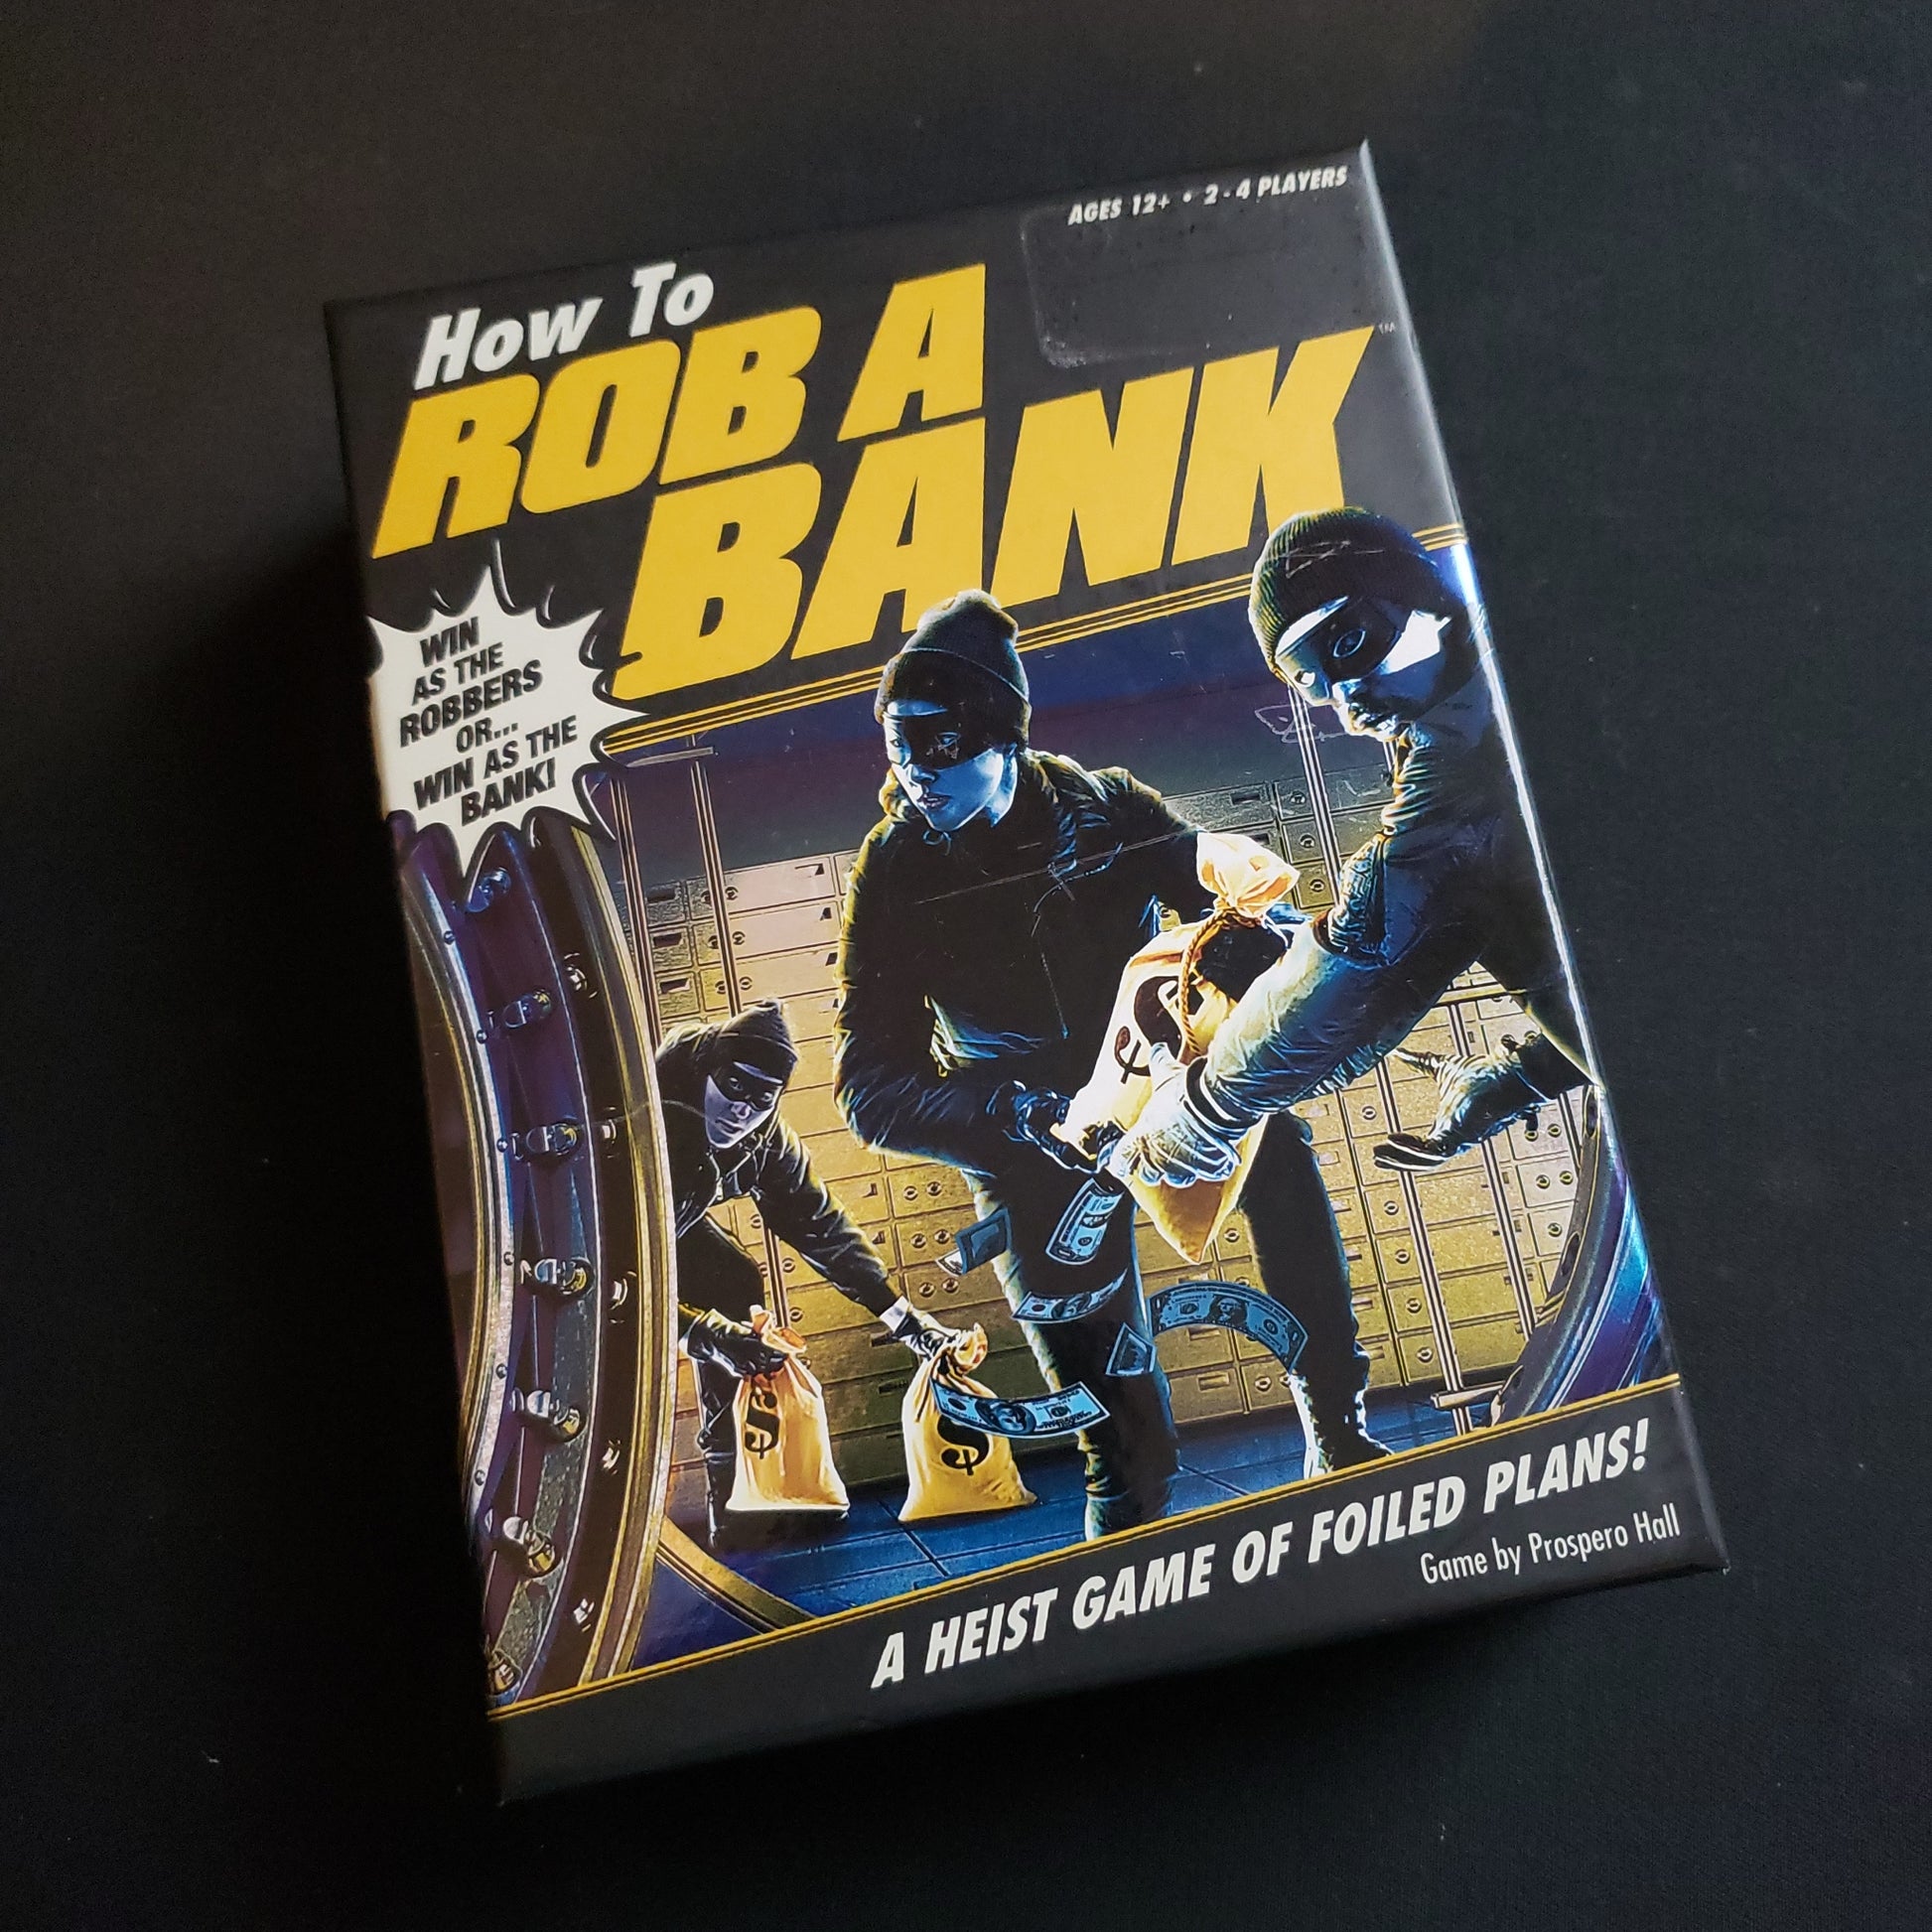 Image shows the front cover of the box of the How to Rob a Bank card game